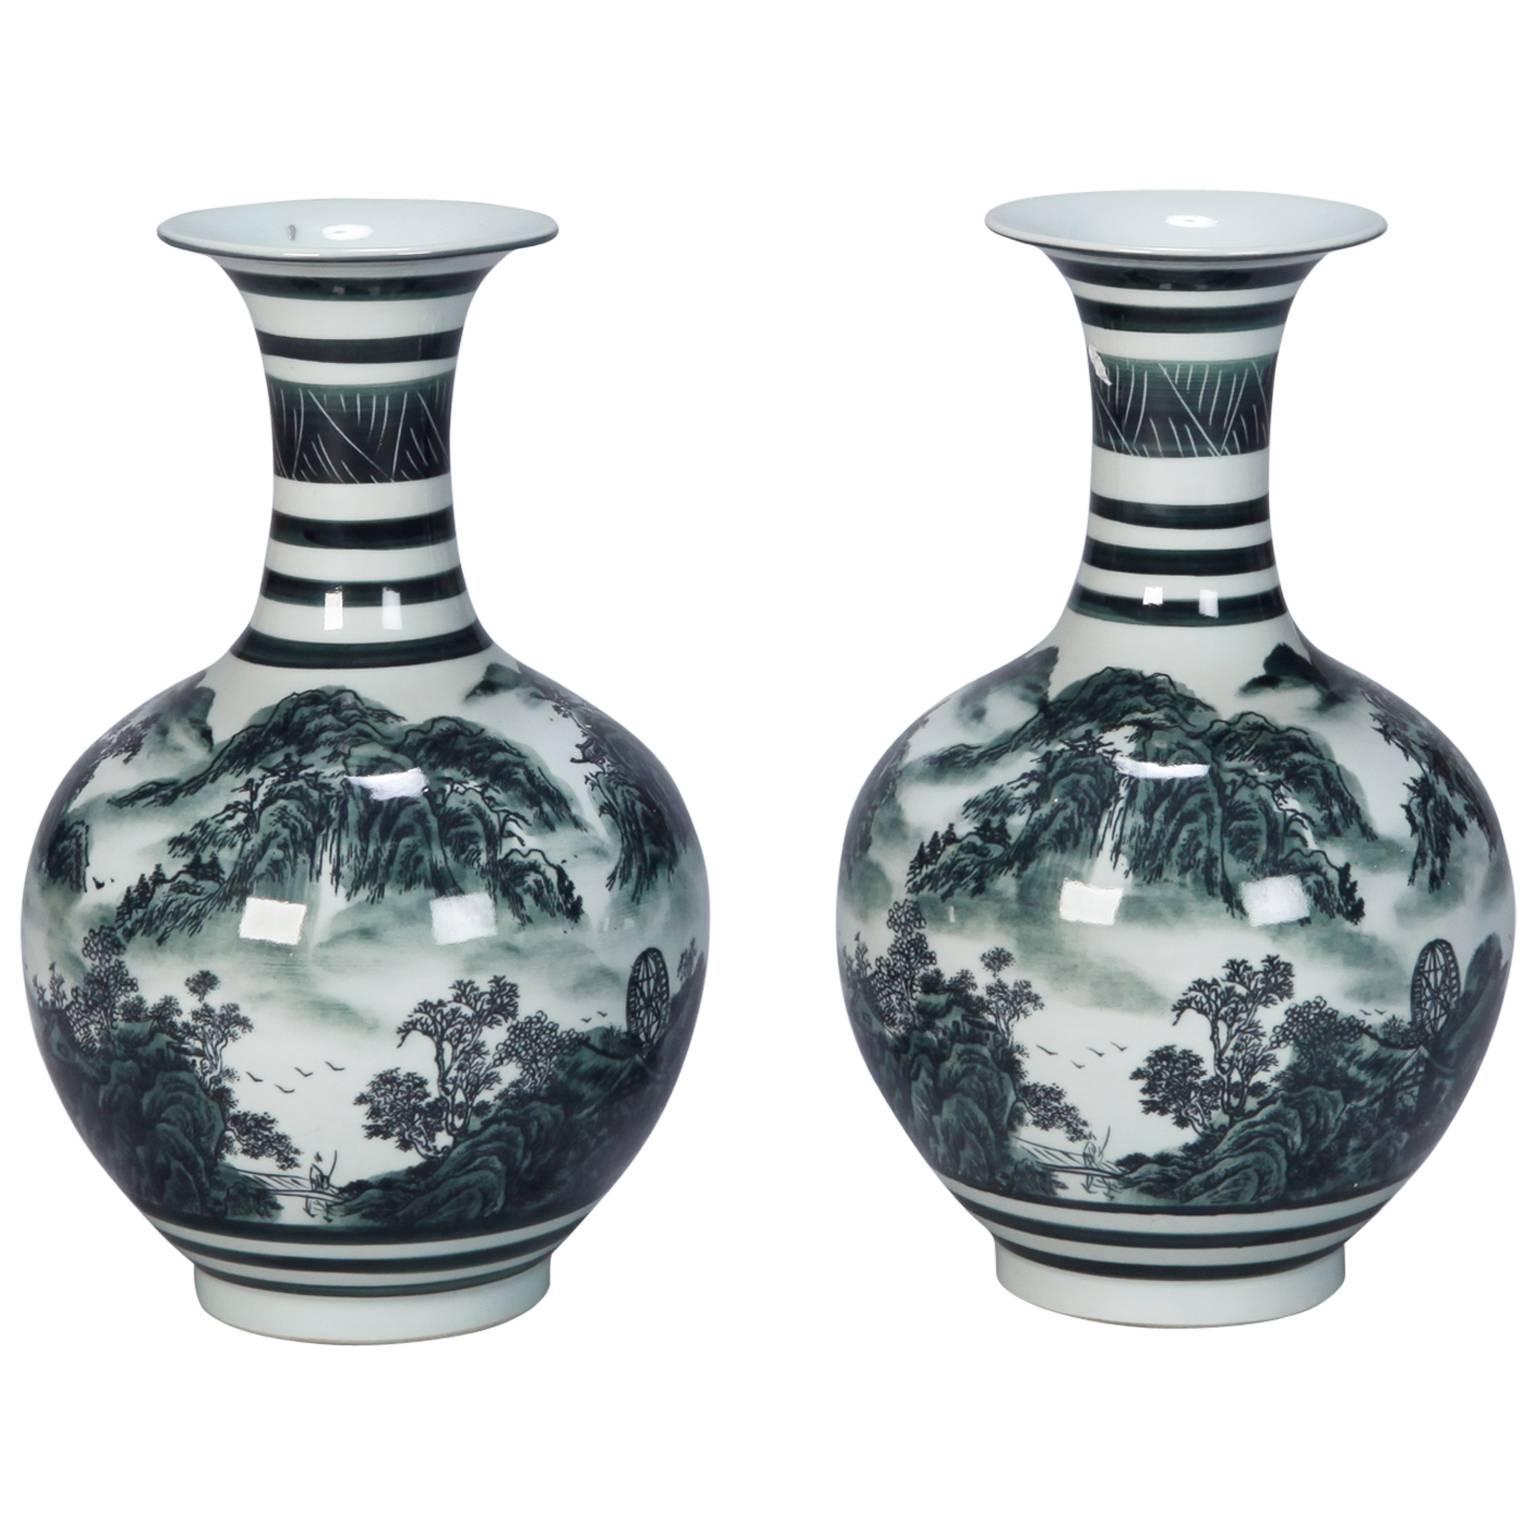 Pair of Green and White Chinese Porcelain Vases